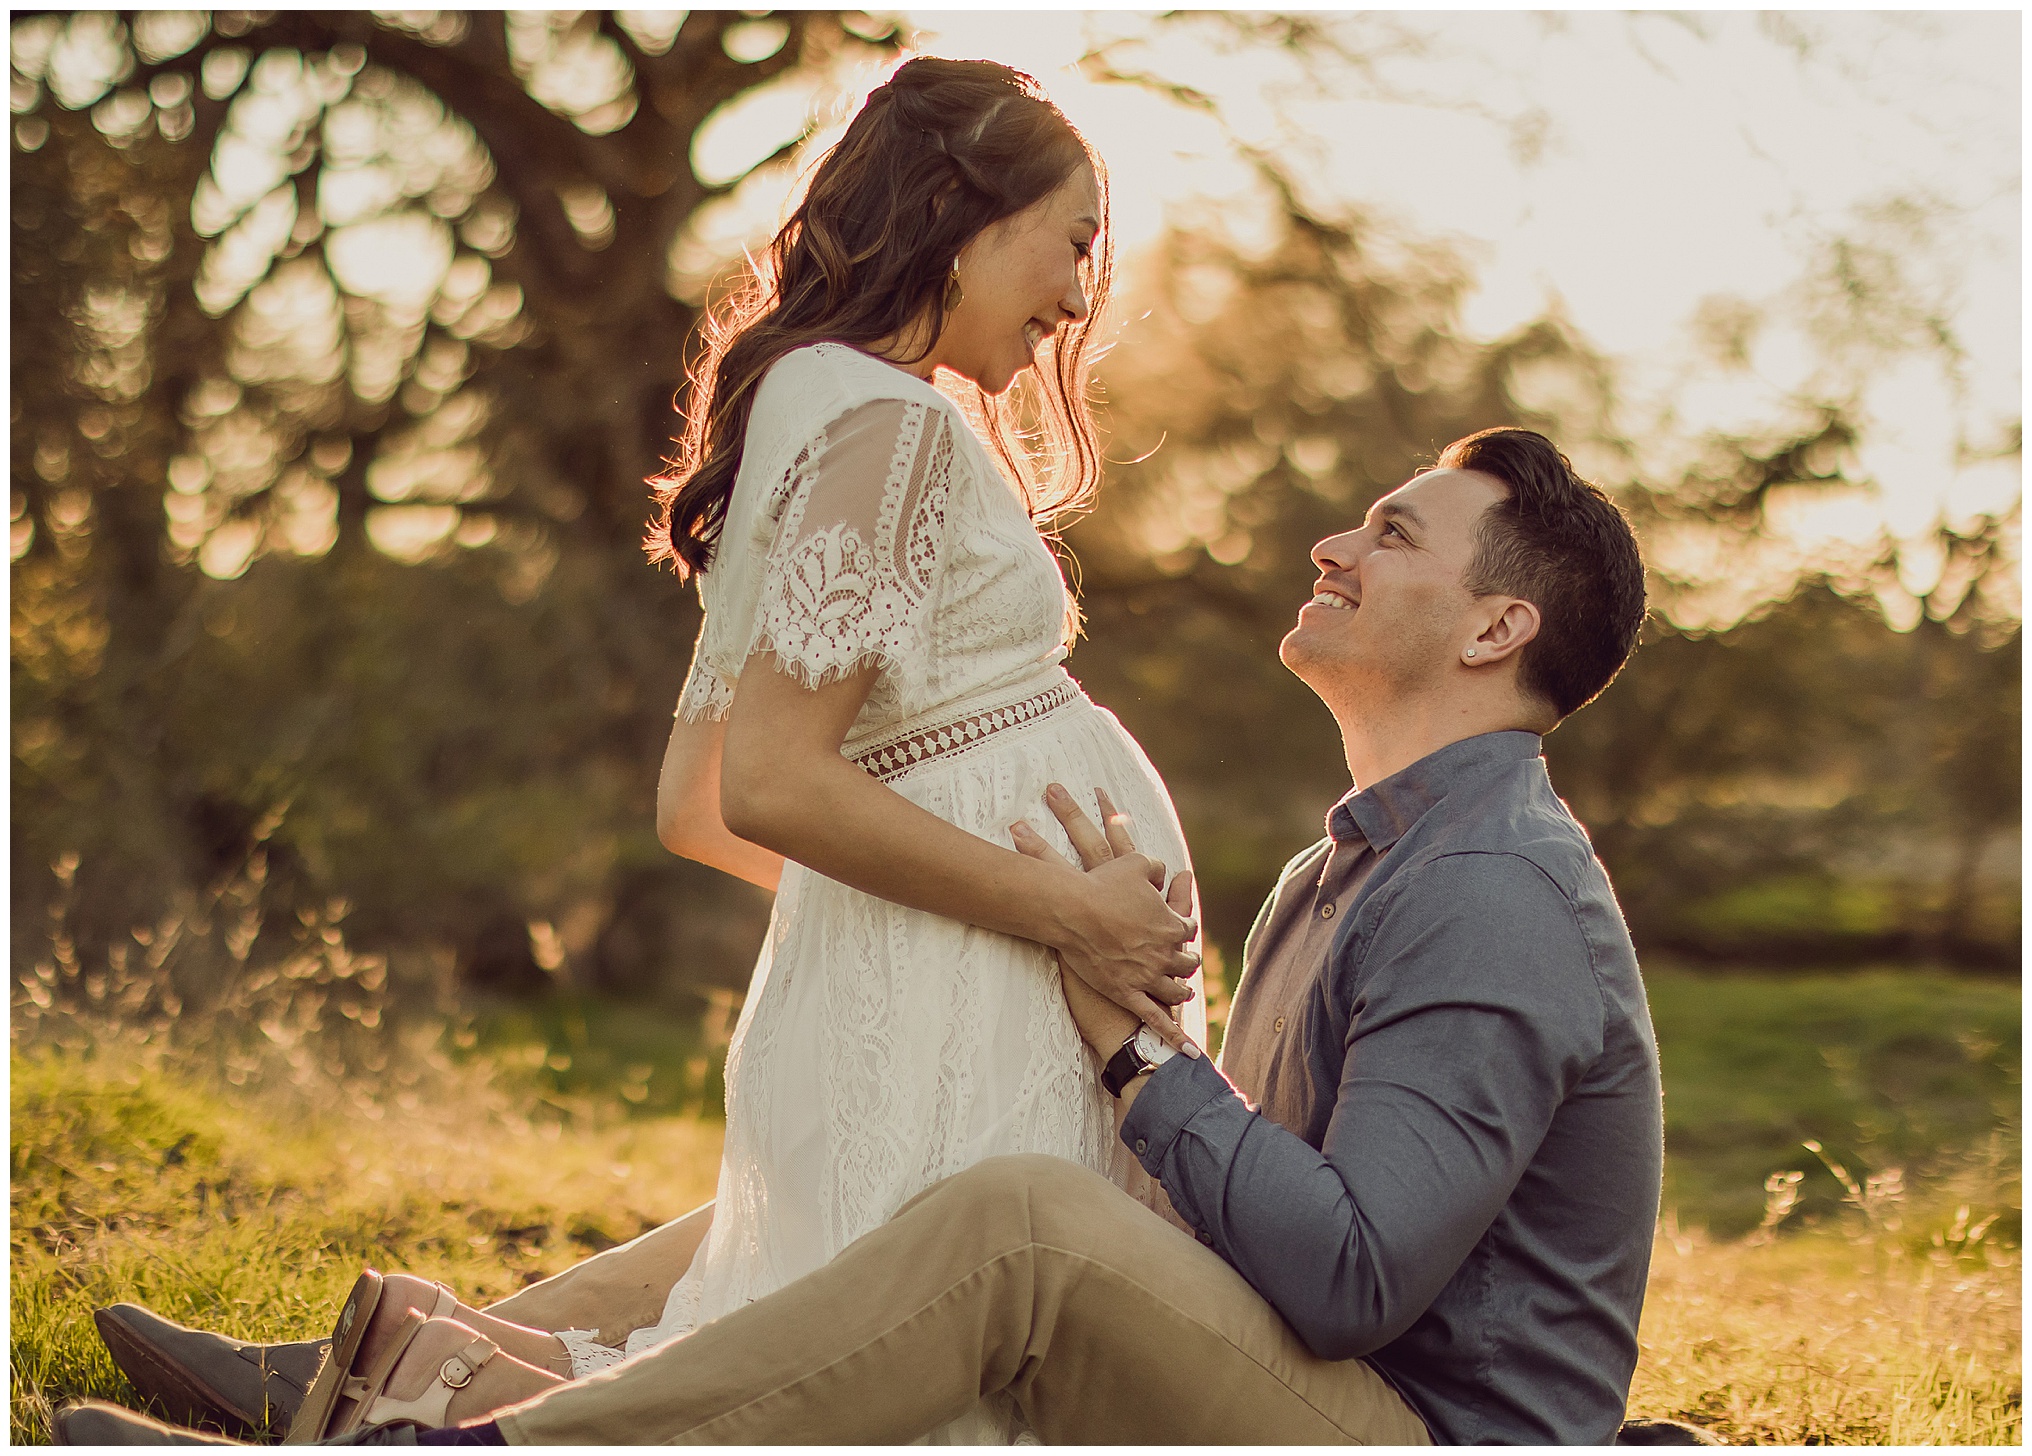 Roseville Maternity Photos, Alex and Jeff